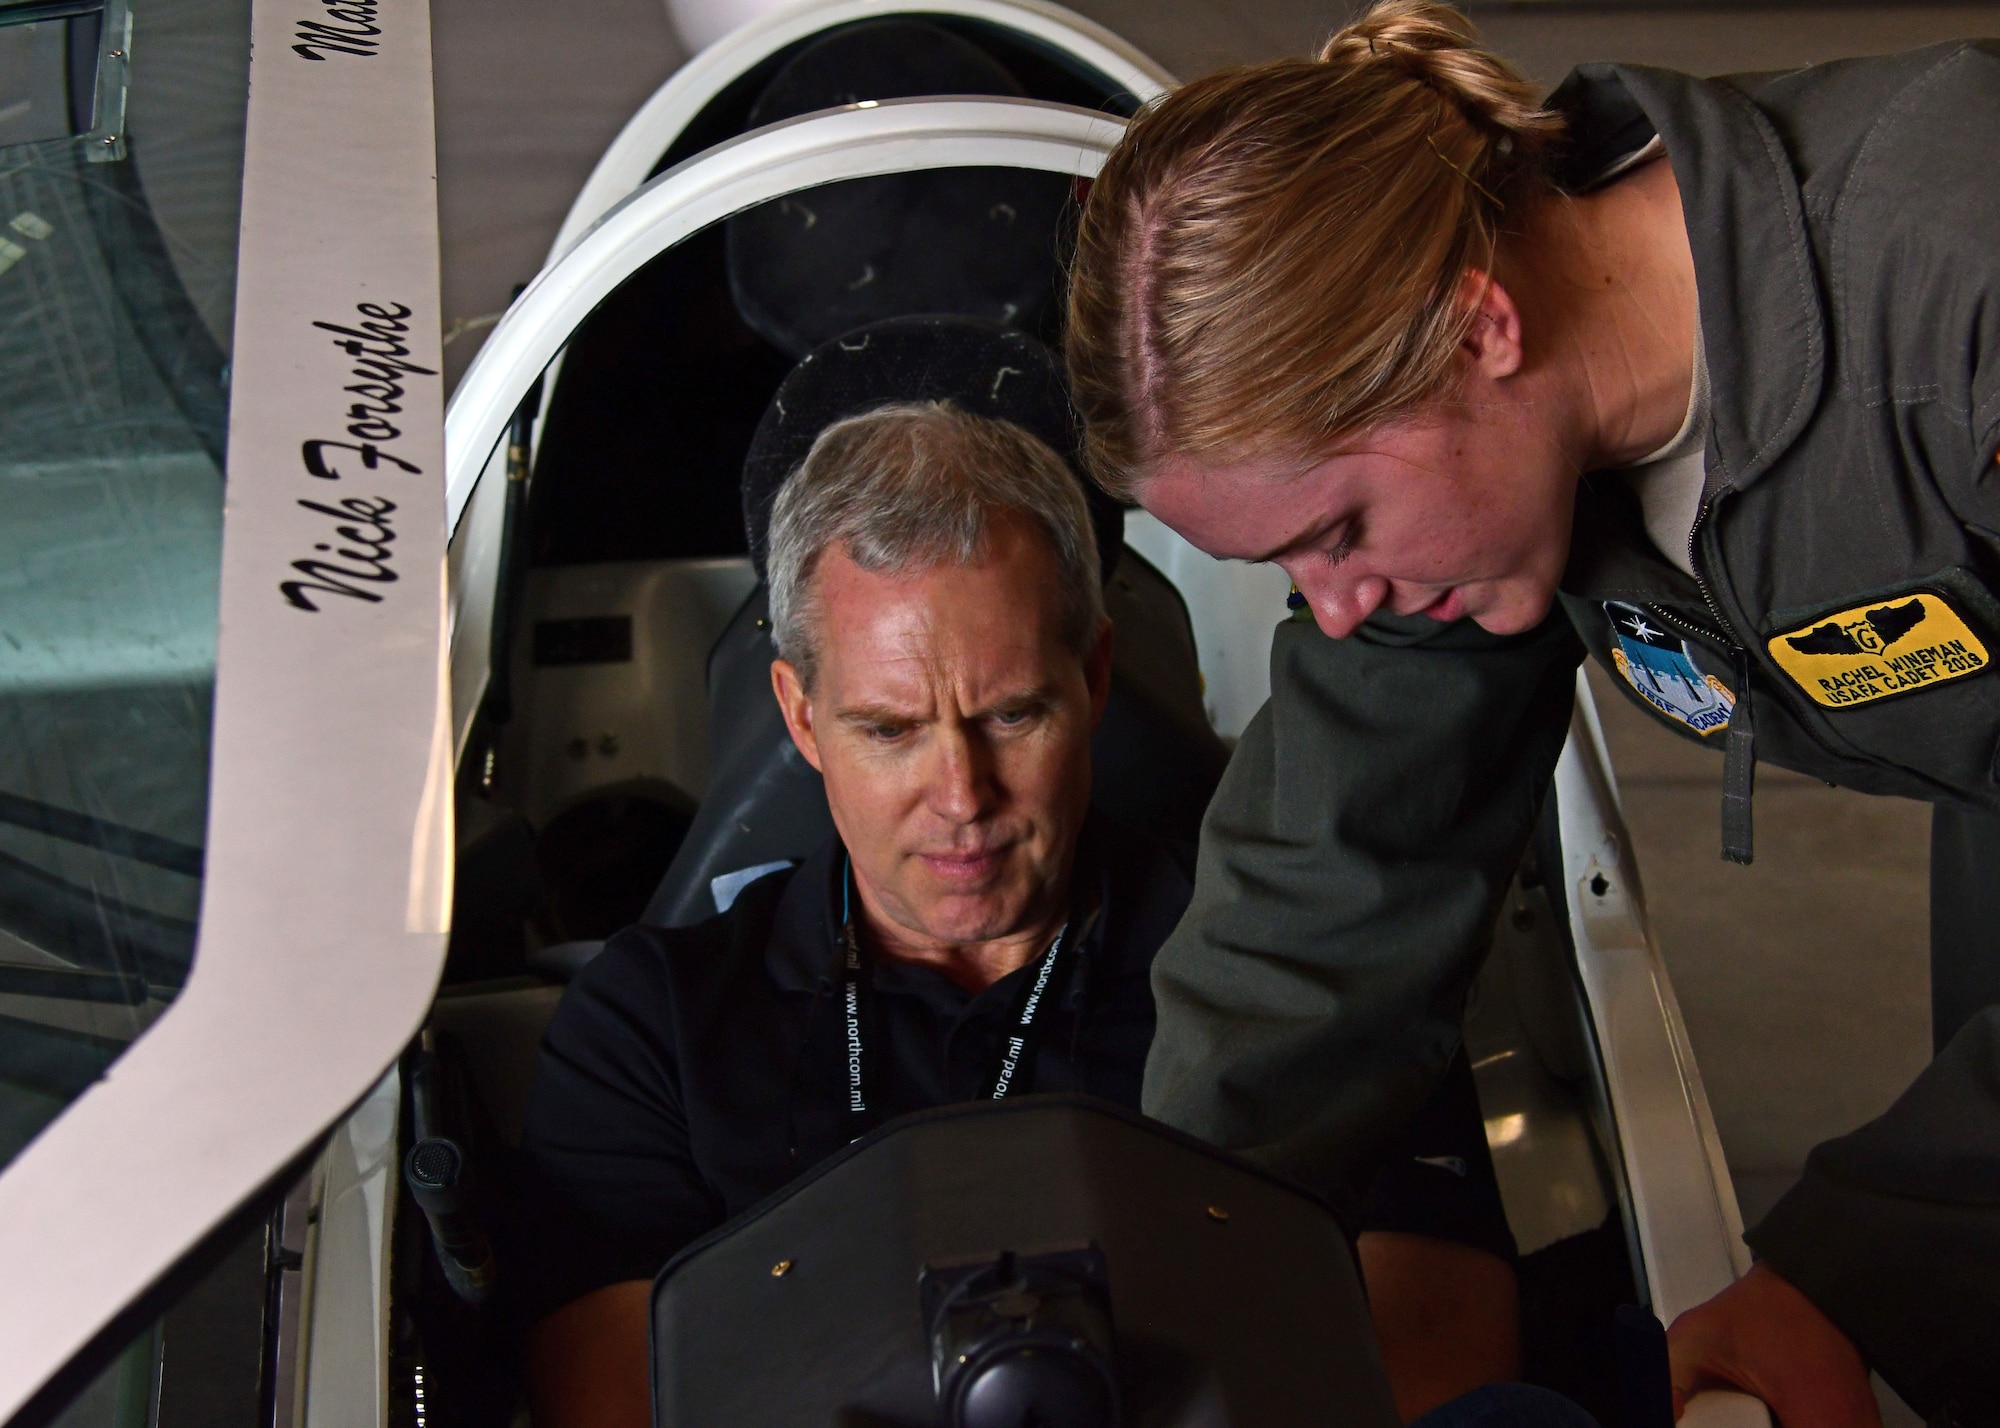 Tim Kelly, a civic leader from Georgia, sits in a glider as a U.S. Air Force Academy cadet points out controls in the cockpit during a tour August 15, 2018. Civic leaders were invited for the first time to the 22nd Air Force’s Senior Leader Summit held in August 2018. (U.S. Air Force photo/Staff Sgt. Andrew Park)